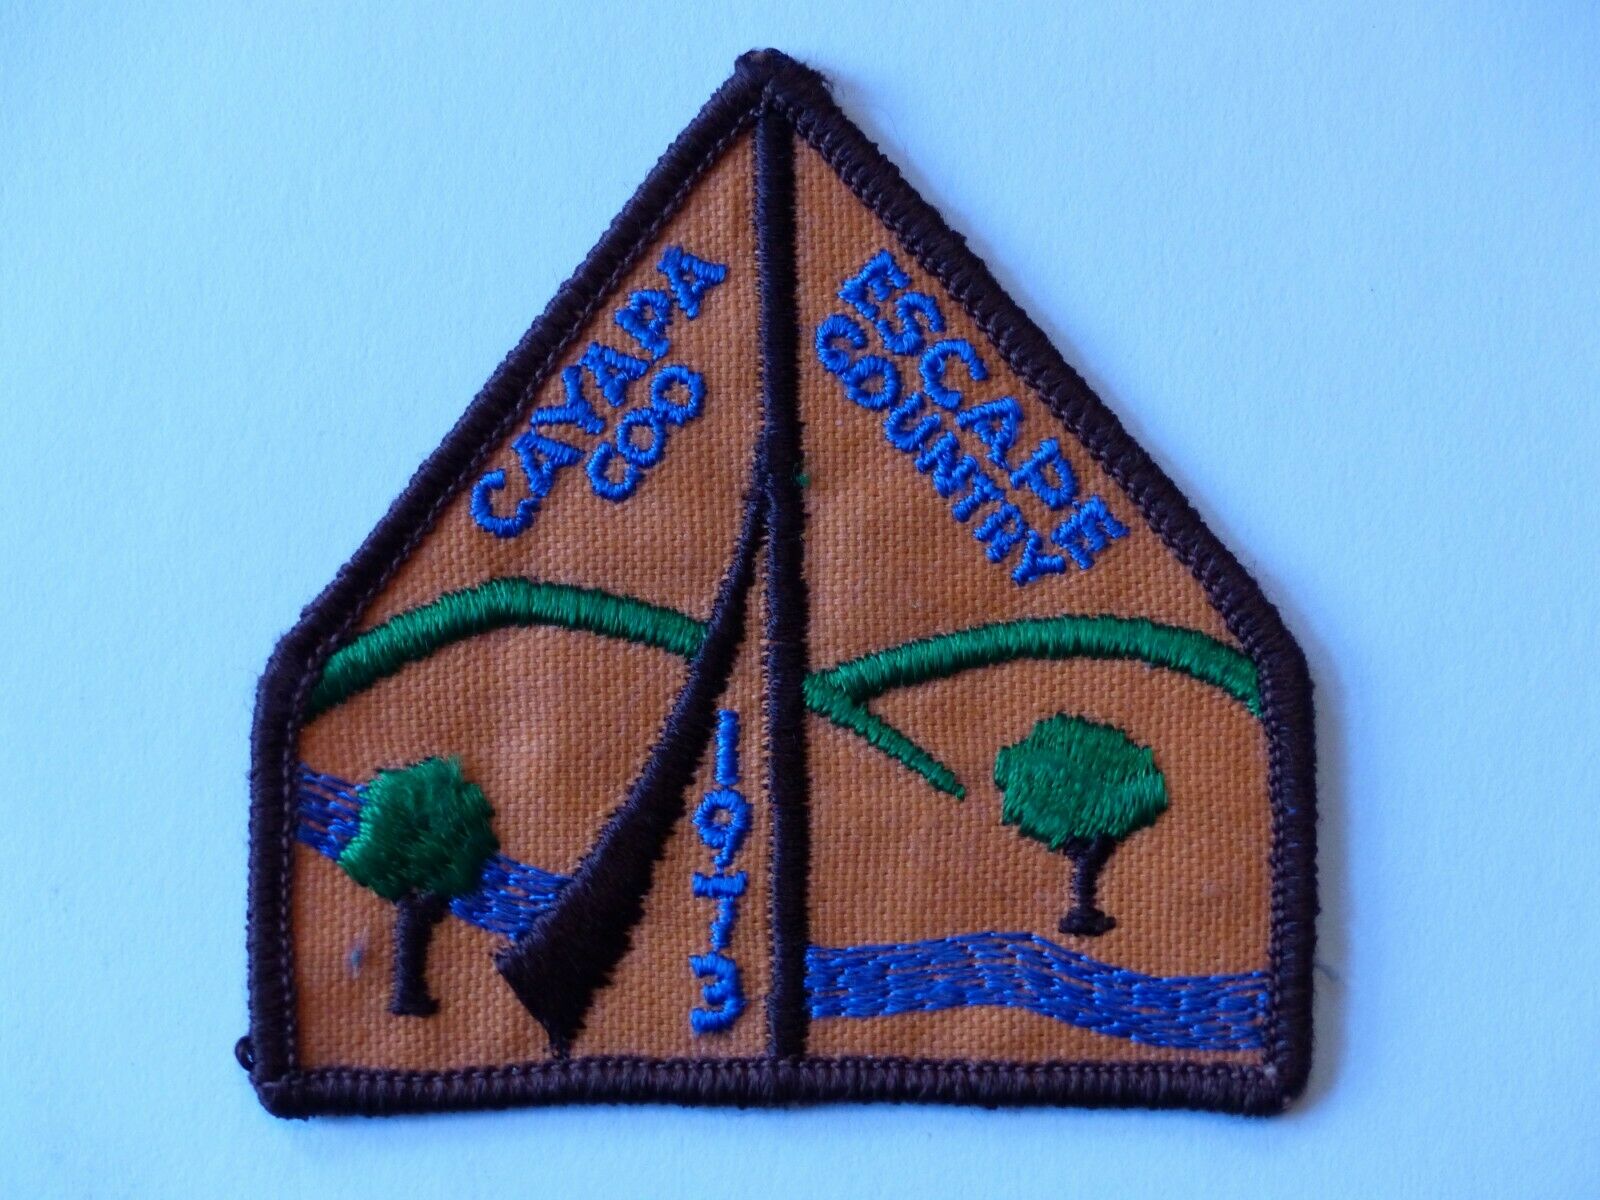 Used 1973 Cayapa Escape Coo Country Boy Scout Tent Shaped Patch Philippines?